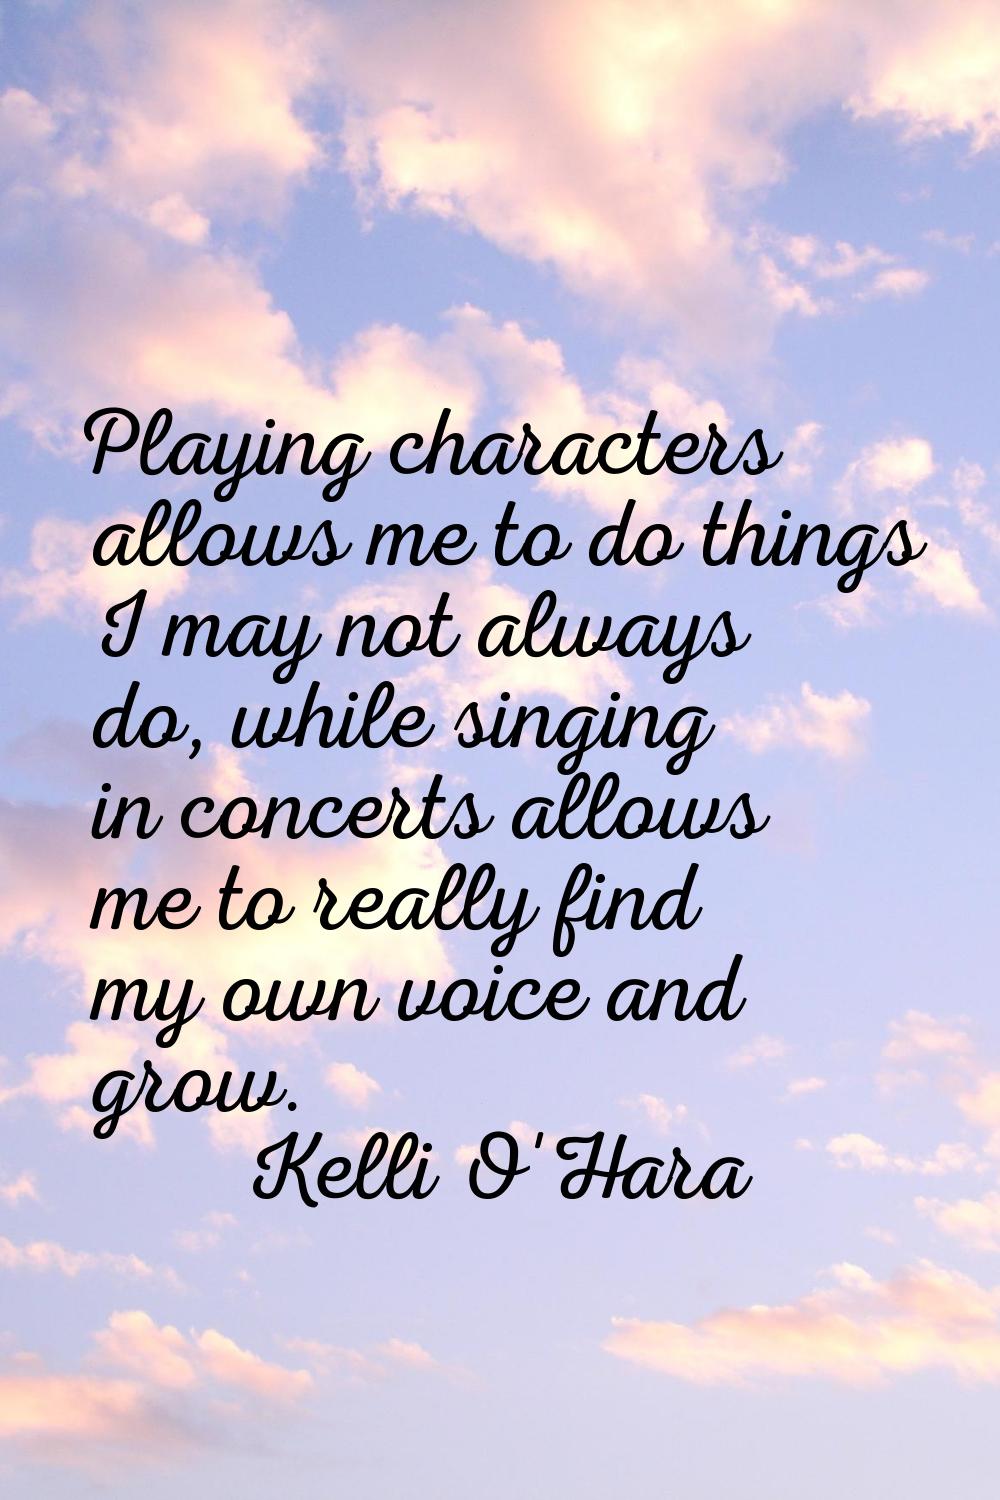 Playing characters allows me to do things I may not always do, while singing in concerts allows me 